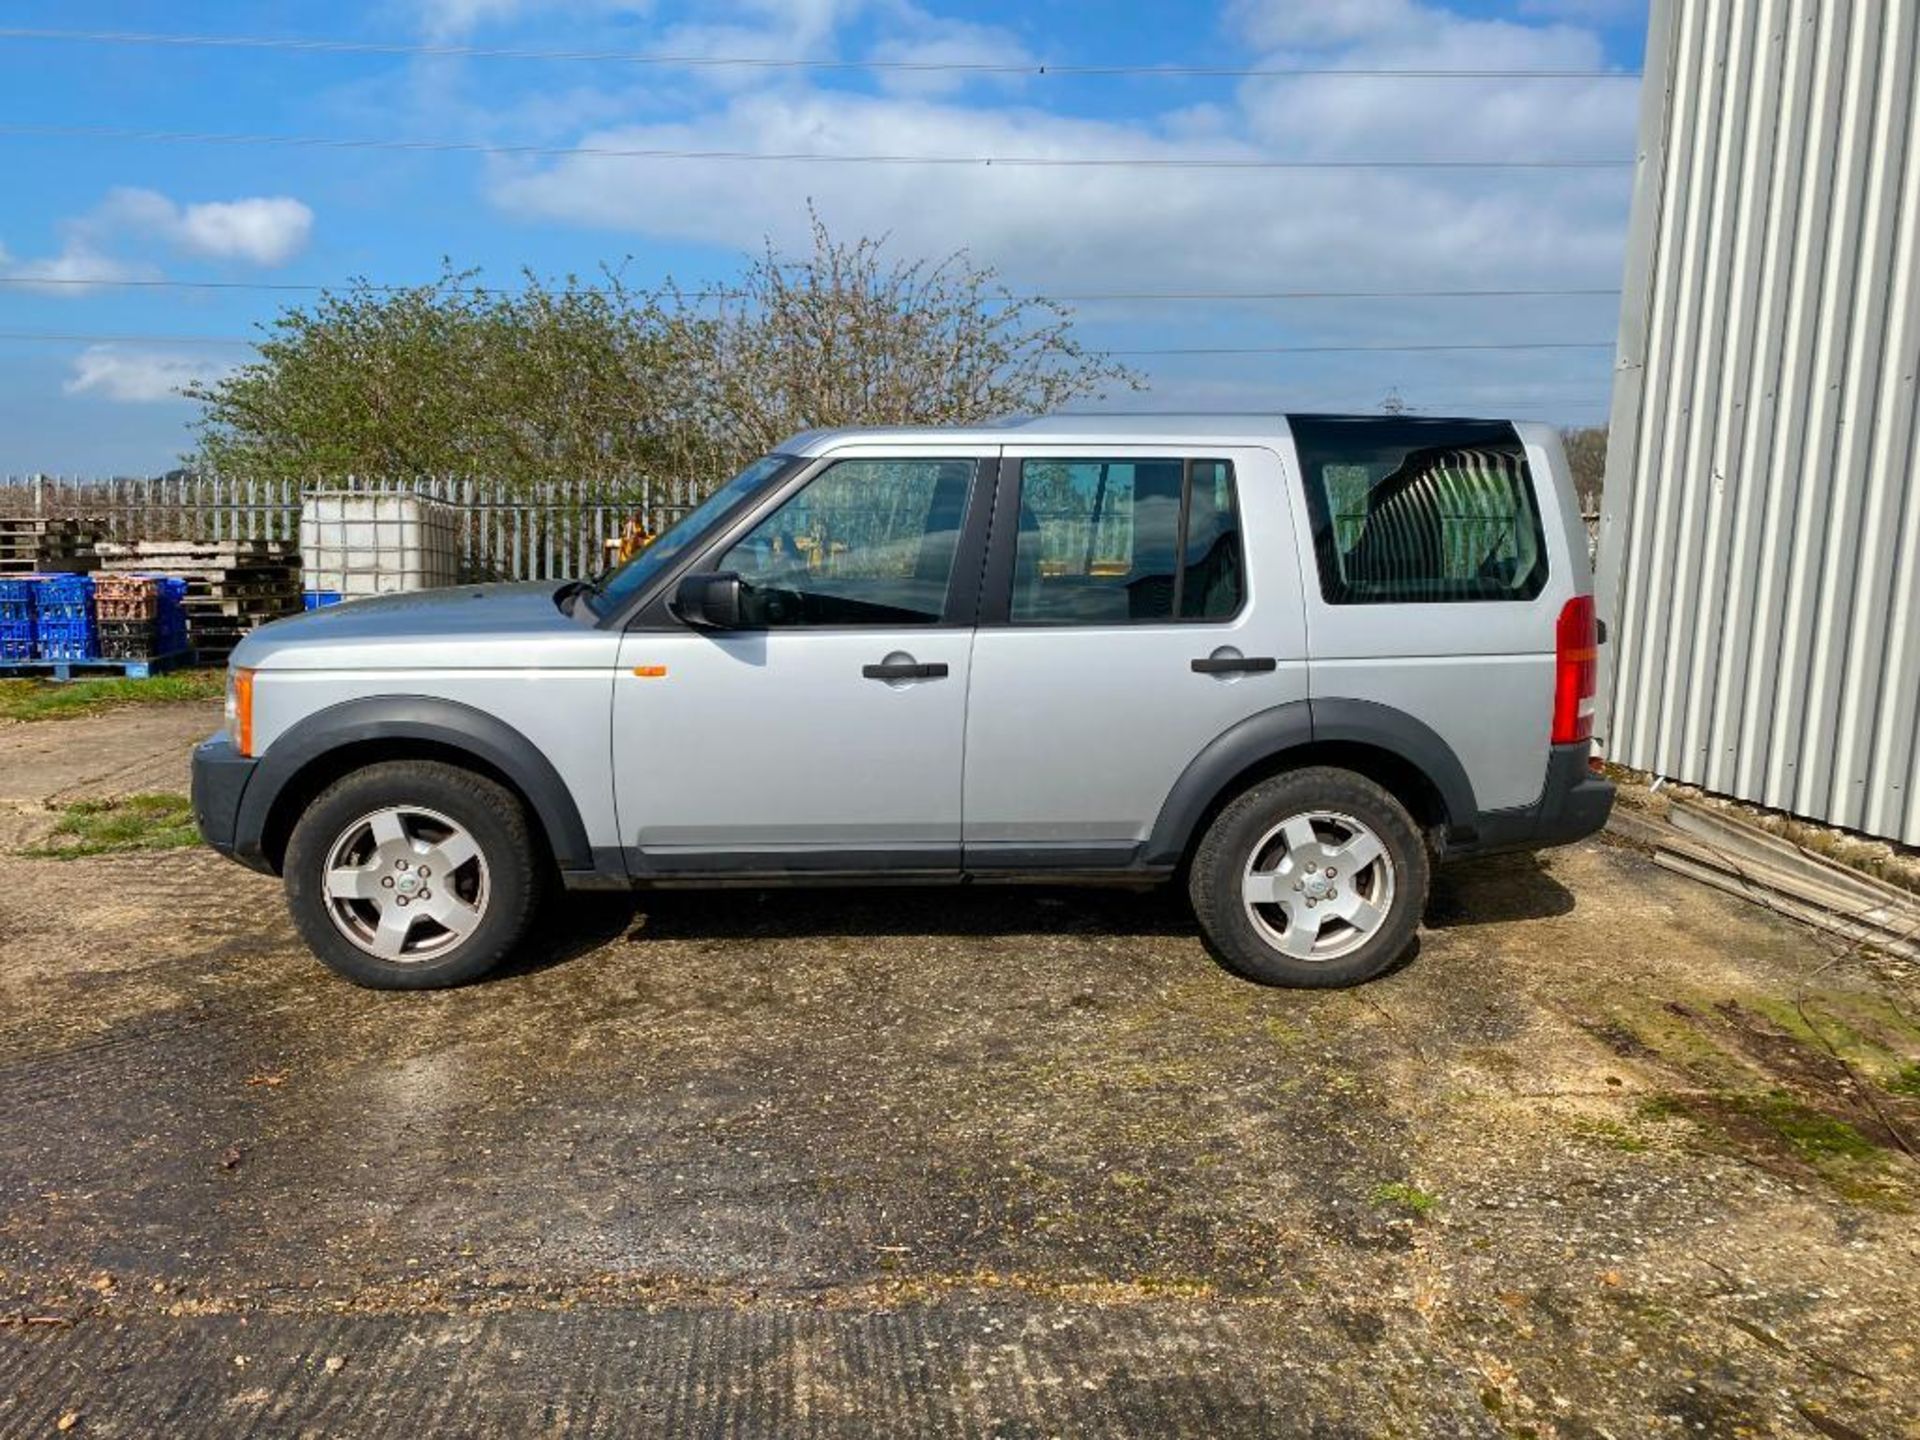 2006 Land Rover Discovery 3 TDV6S, 4wd, silver, manual, diesel. Reg: KD06 GYH. Miles: 119,637. NB: r - Image 3 of 5